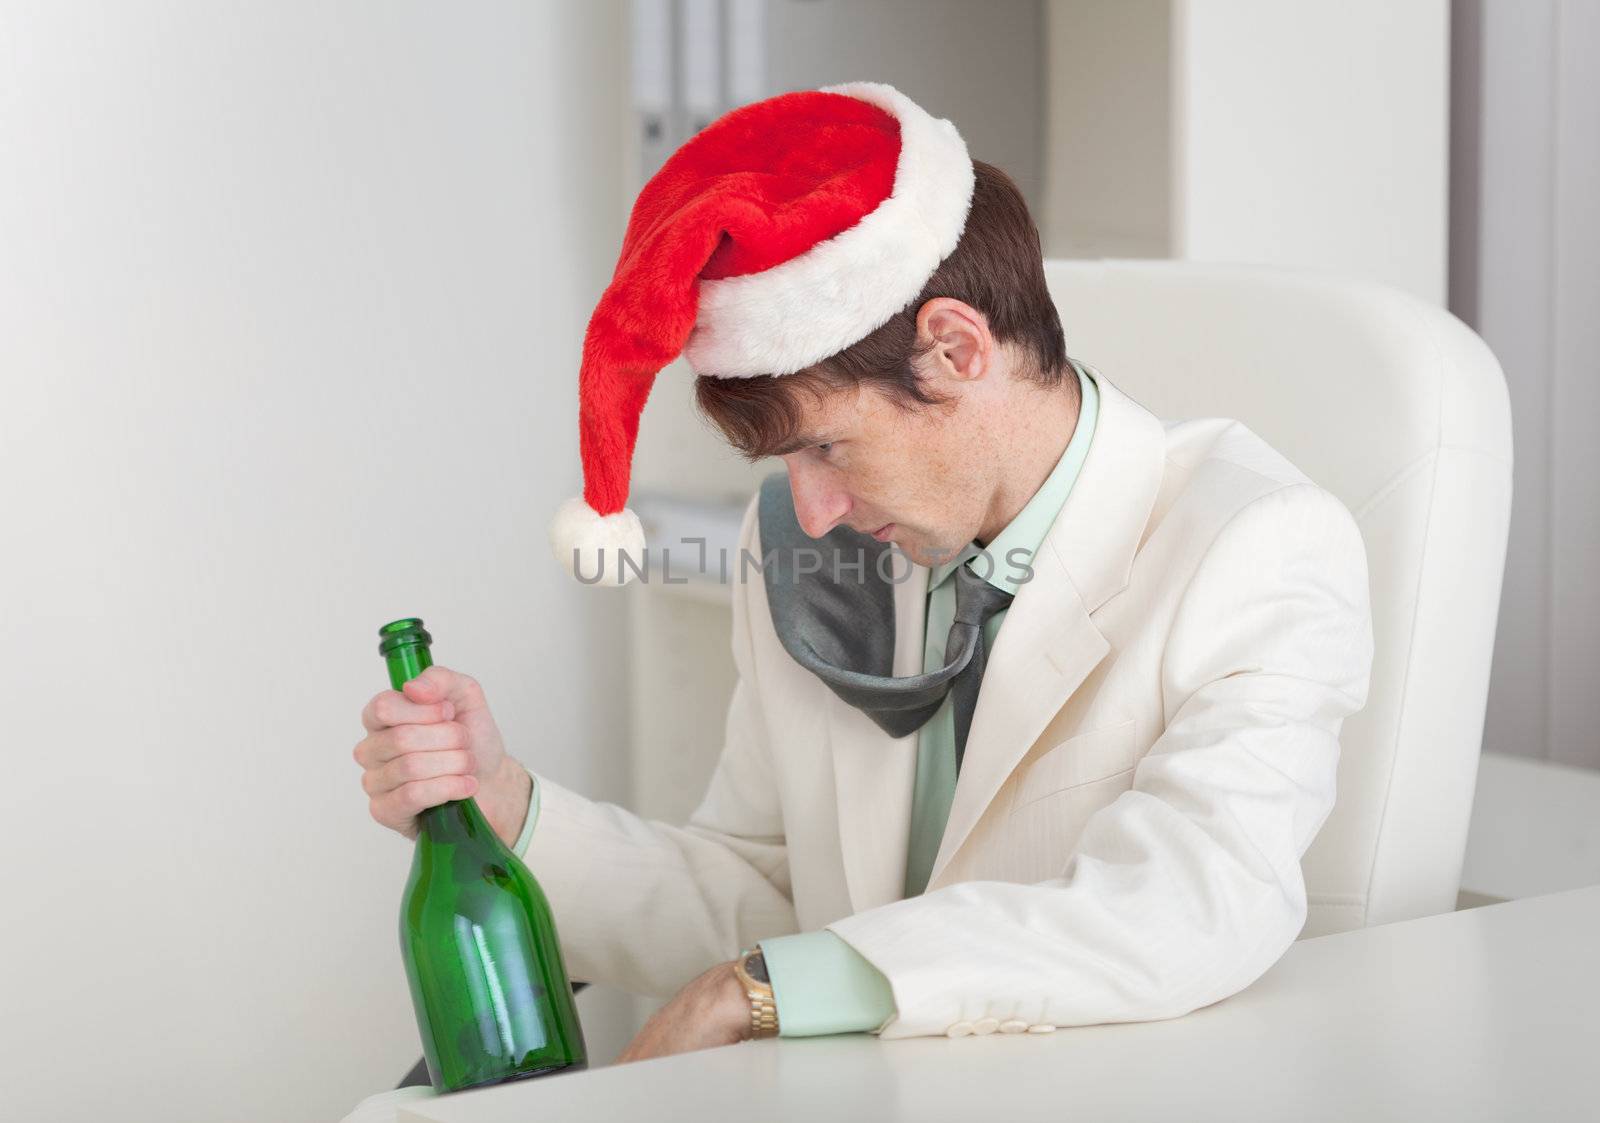 The drunken man in a Christmas cap with a bottle in a hand